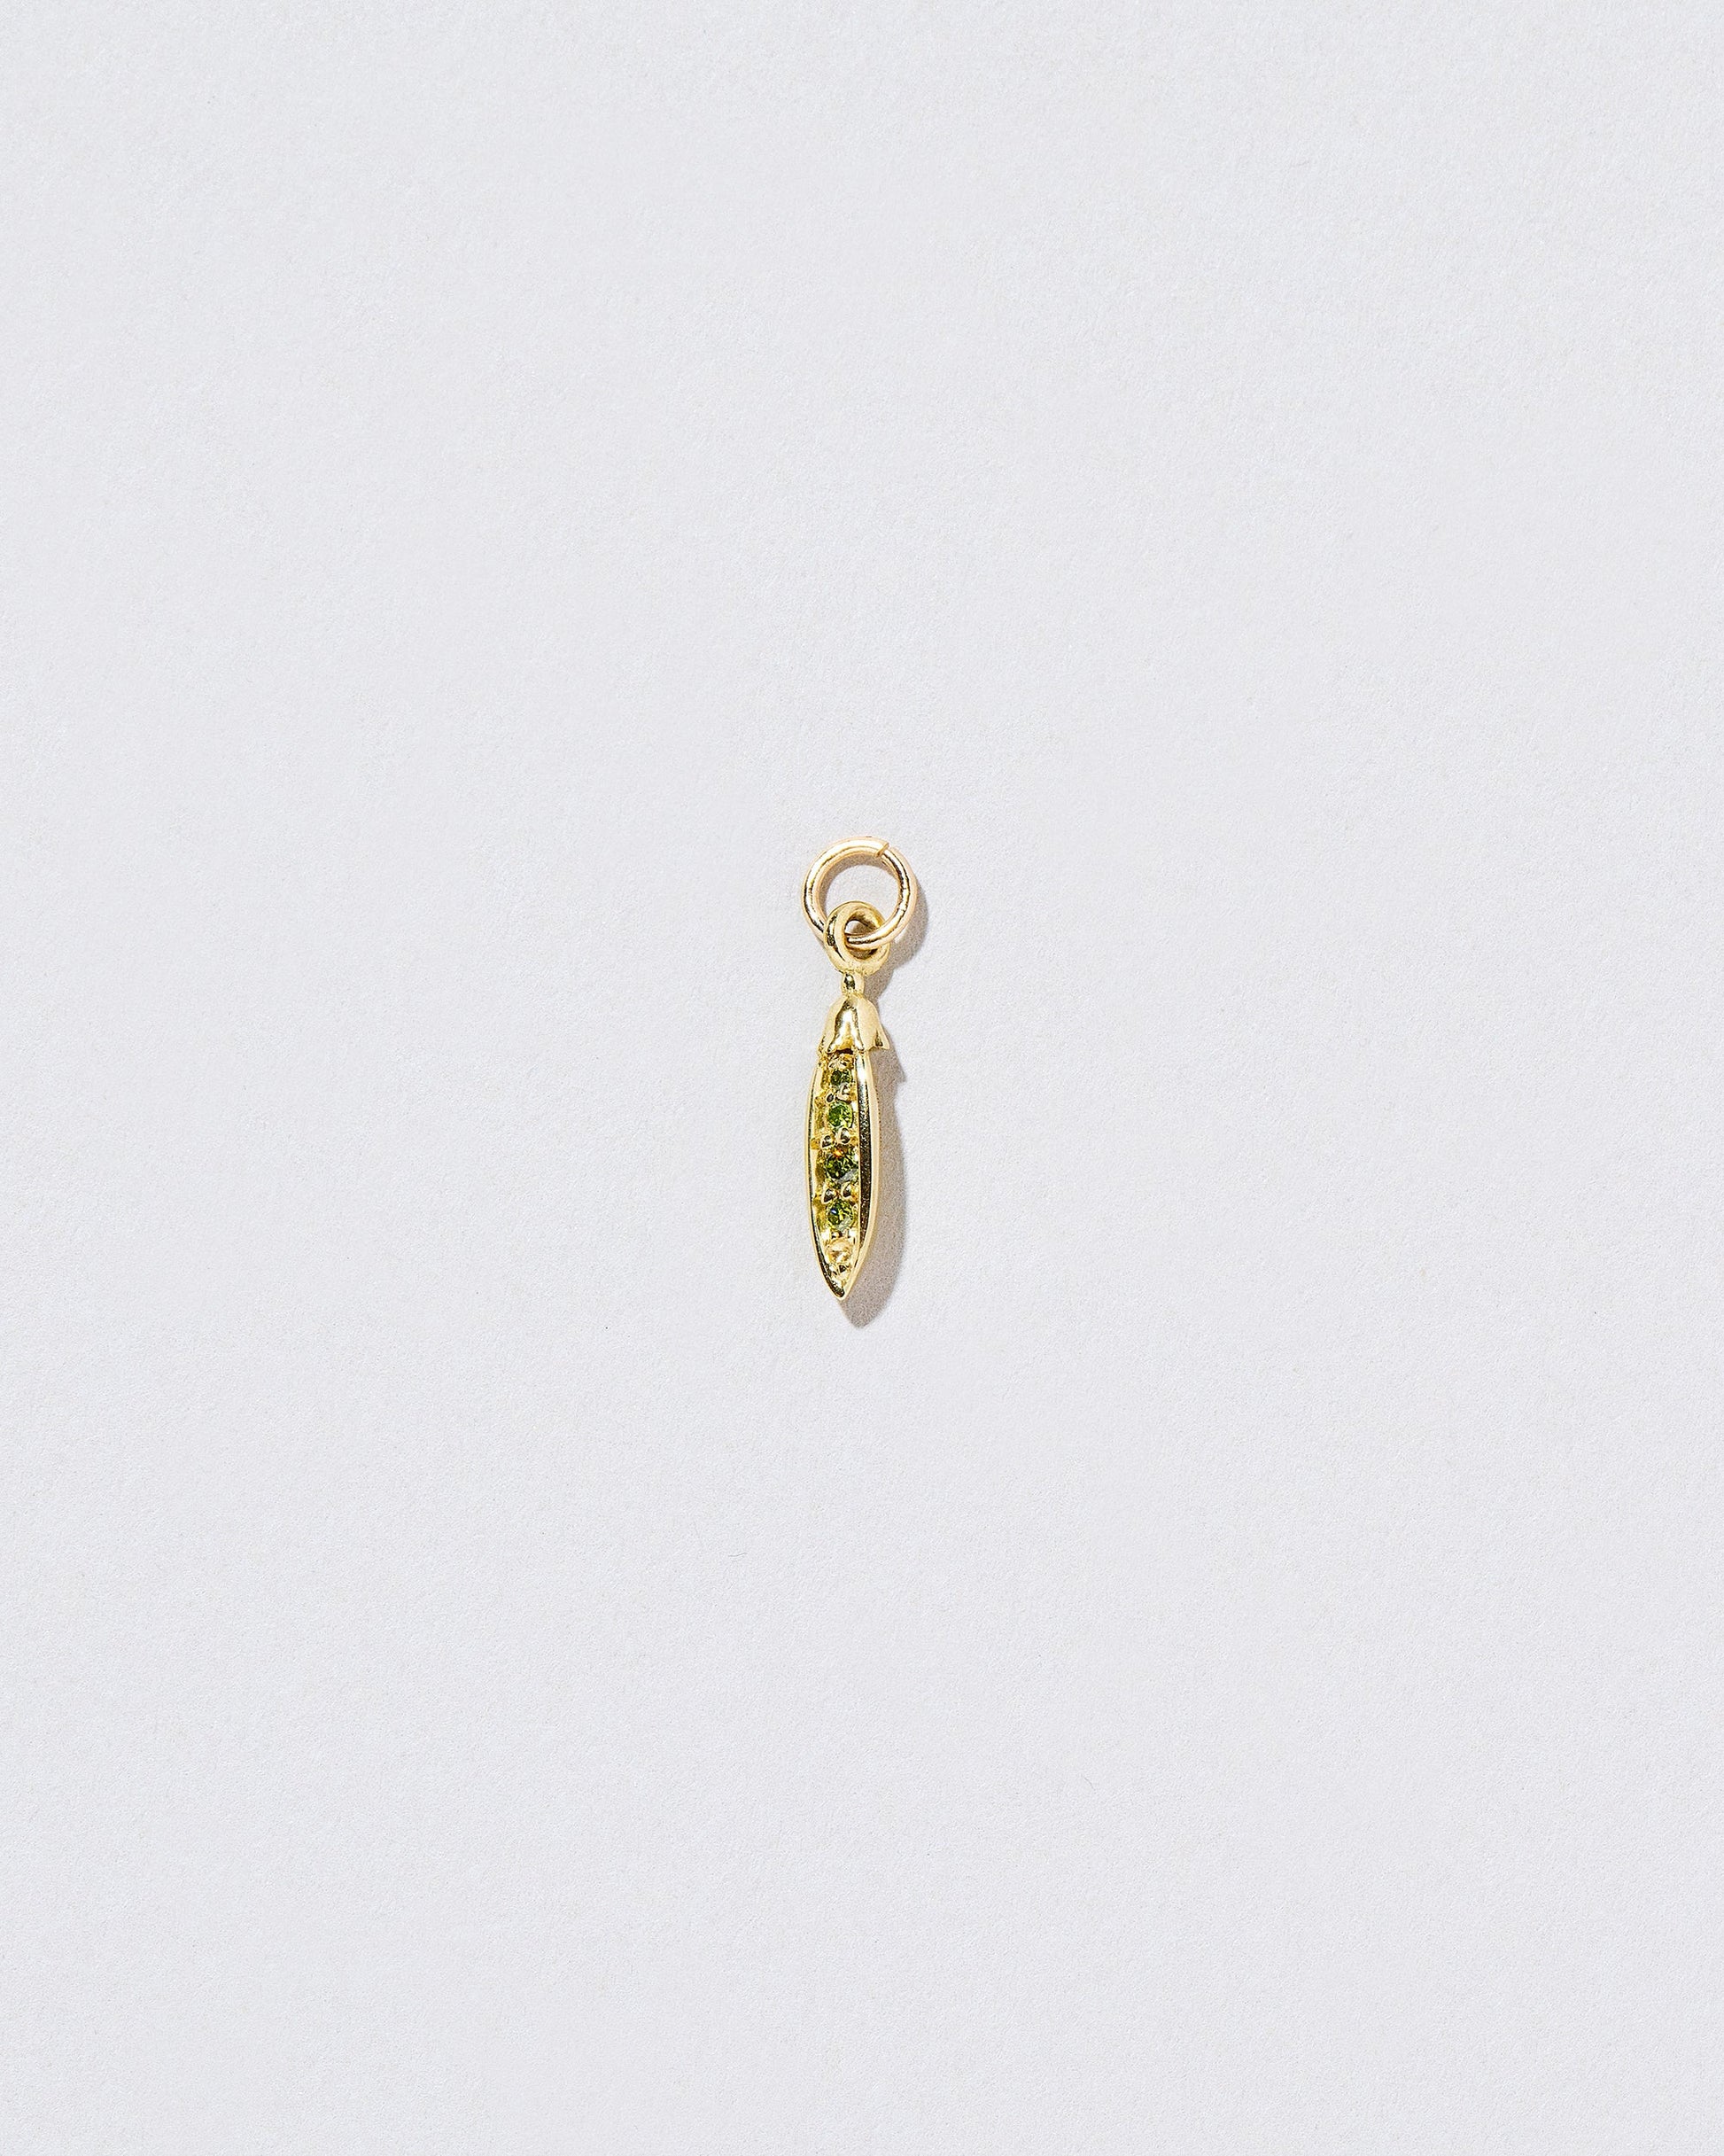  Snap Pea Charm on light color background.